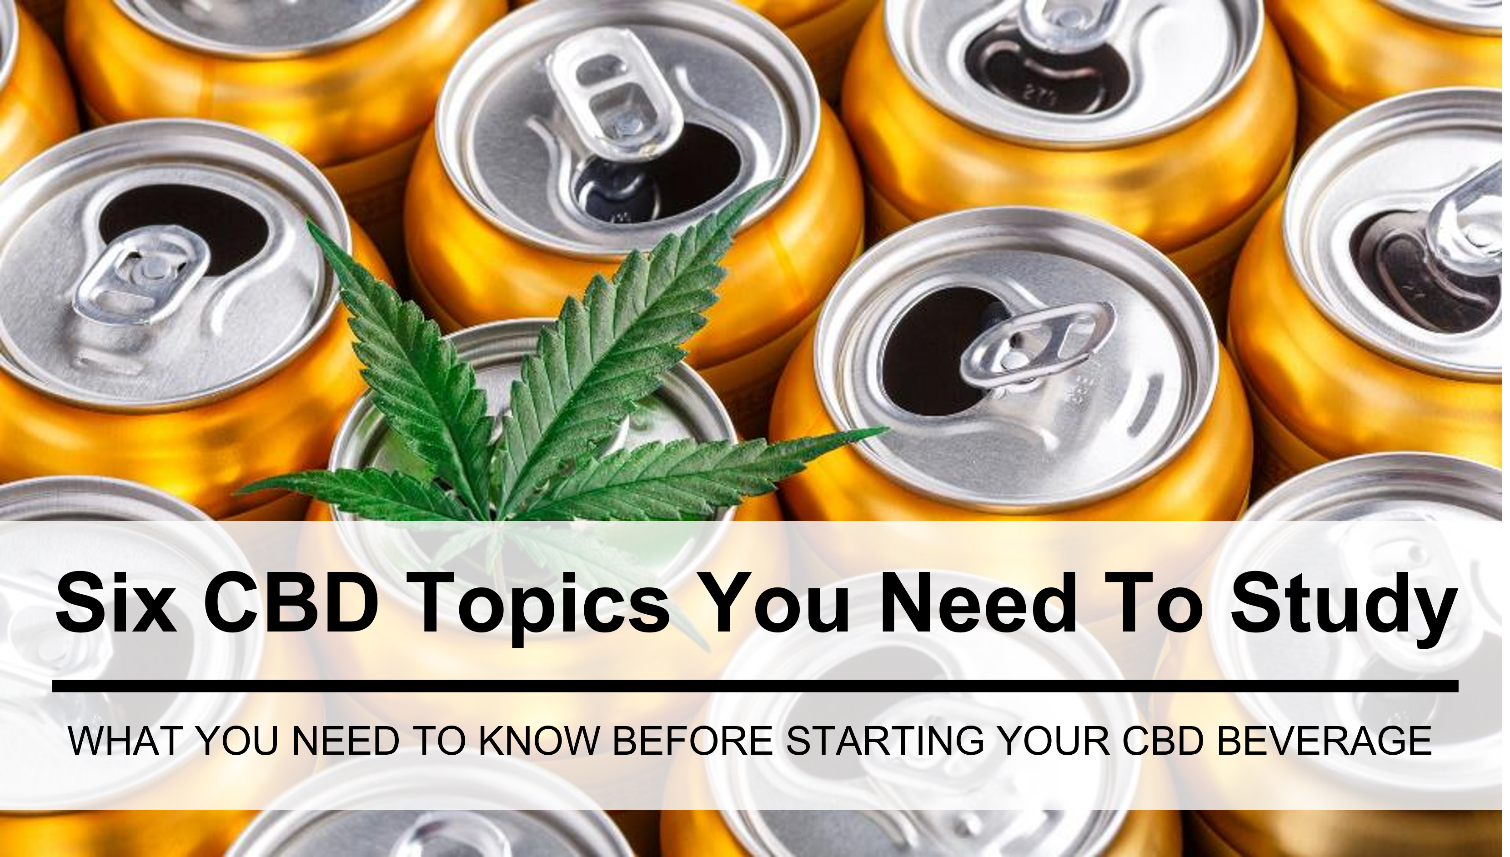 Starting a CBD Beverage Business in the US